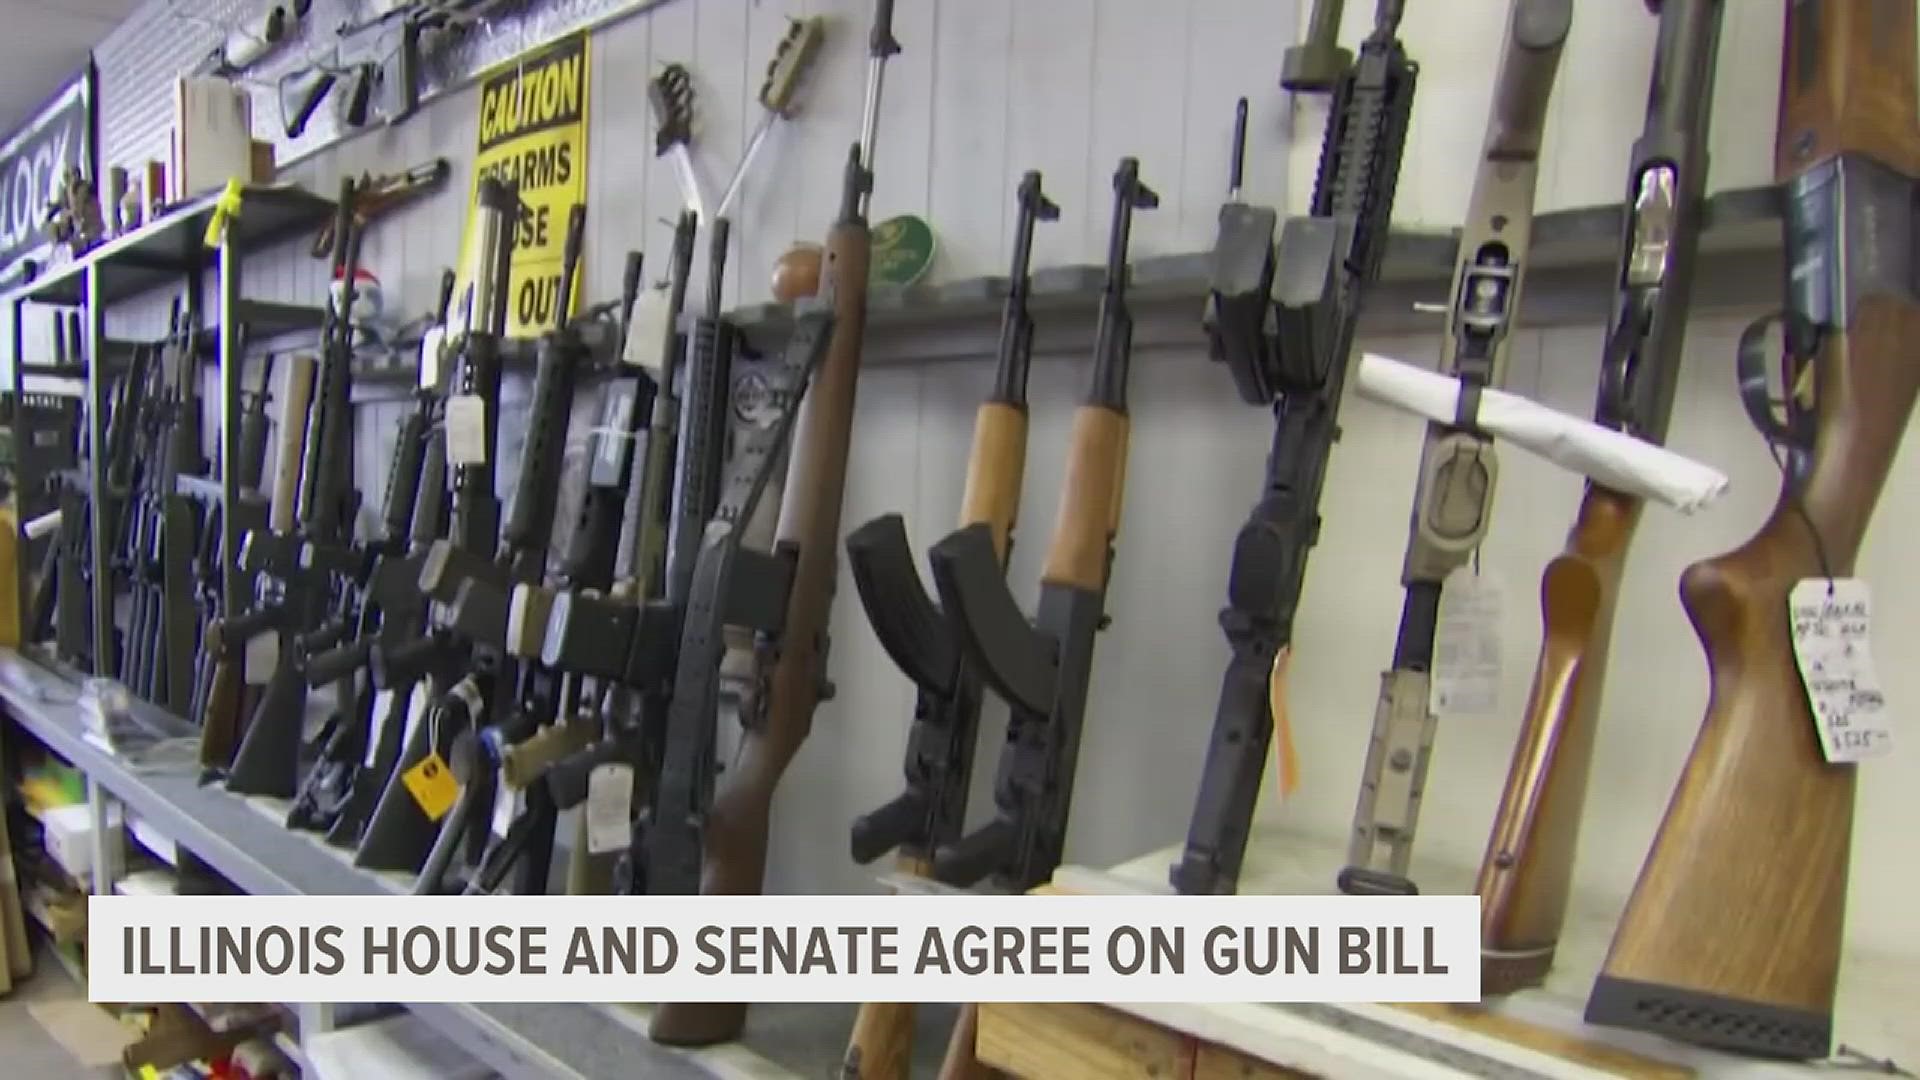 Assault weapons ban passed in Illinois